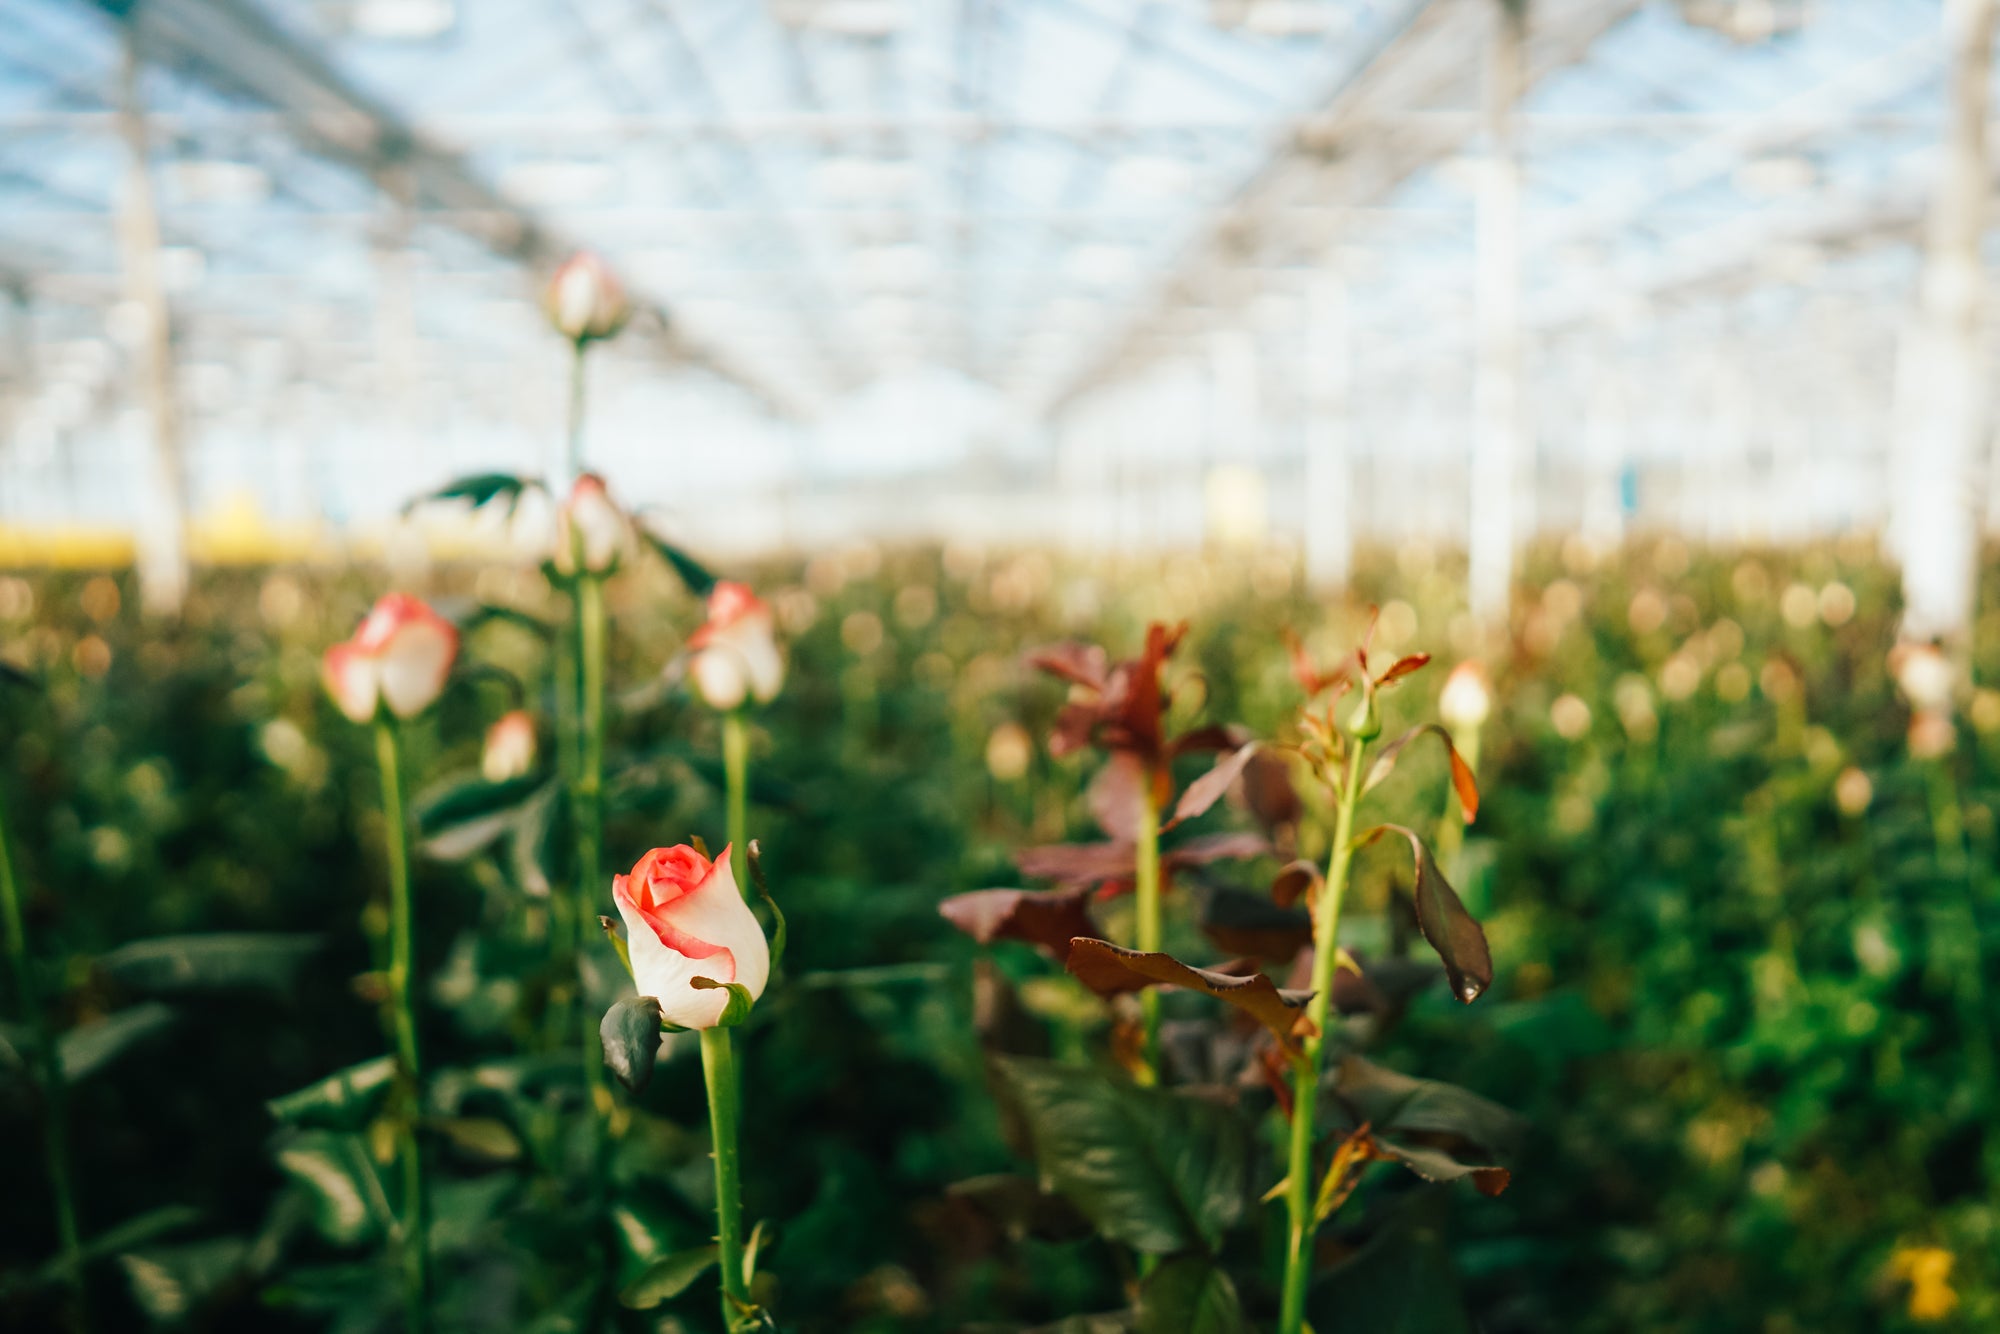 Lush greenhouse filled with rows of roses thriving under natural daylight, showcasing sustainable cultivation practices